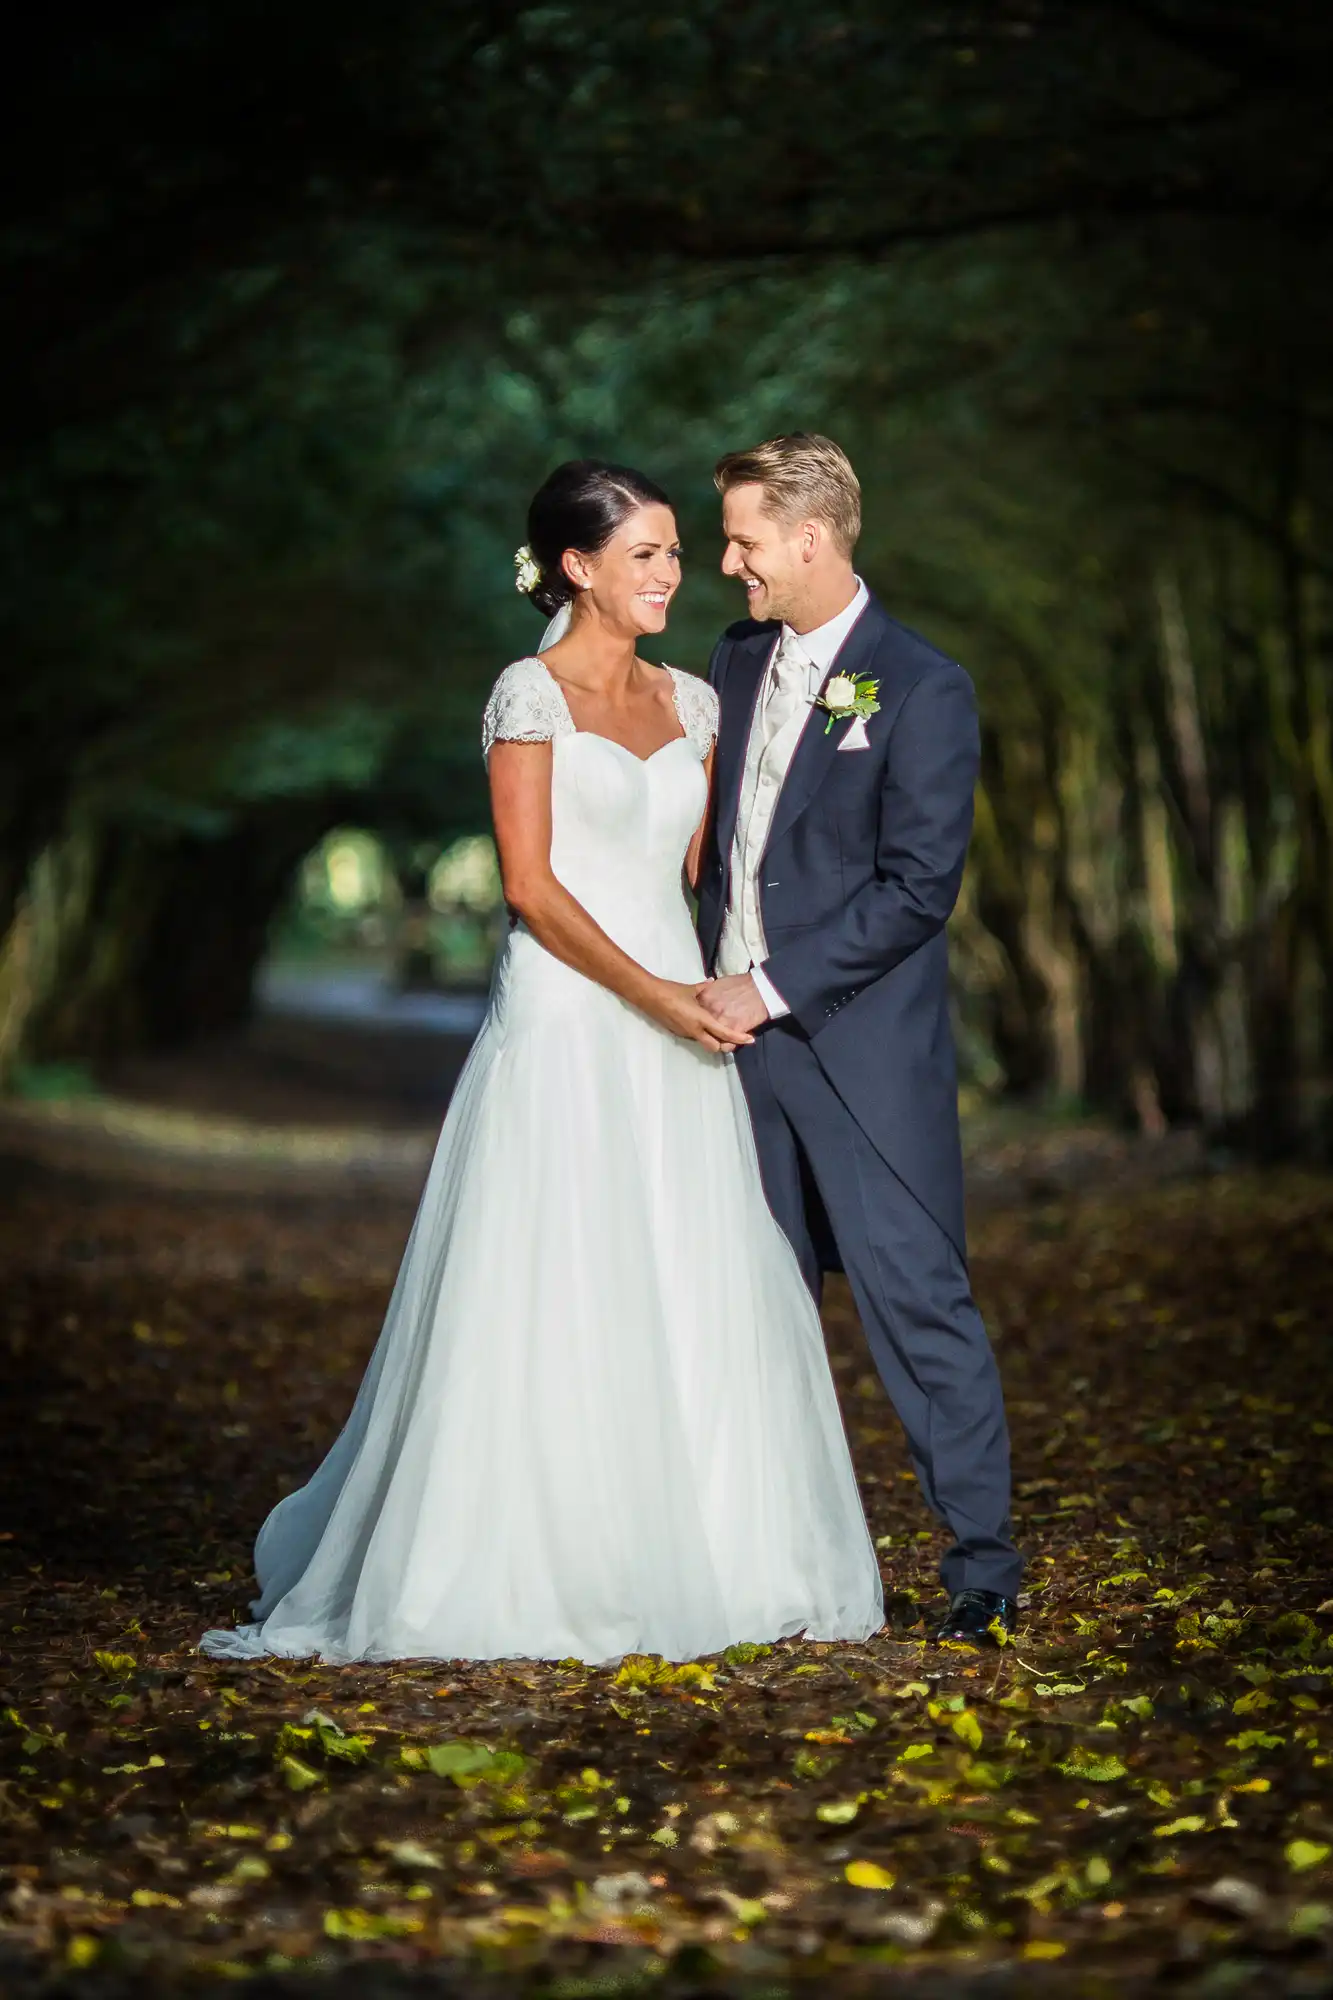 A bride and groom holding hands and smiling at each other on a forest path, surrounded by trees and fallen leaves.